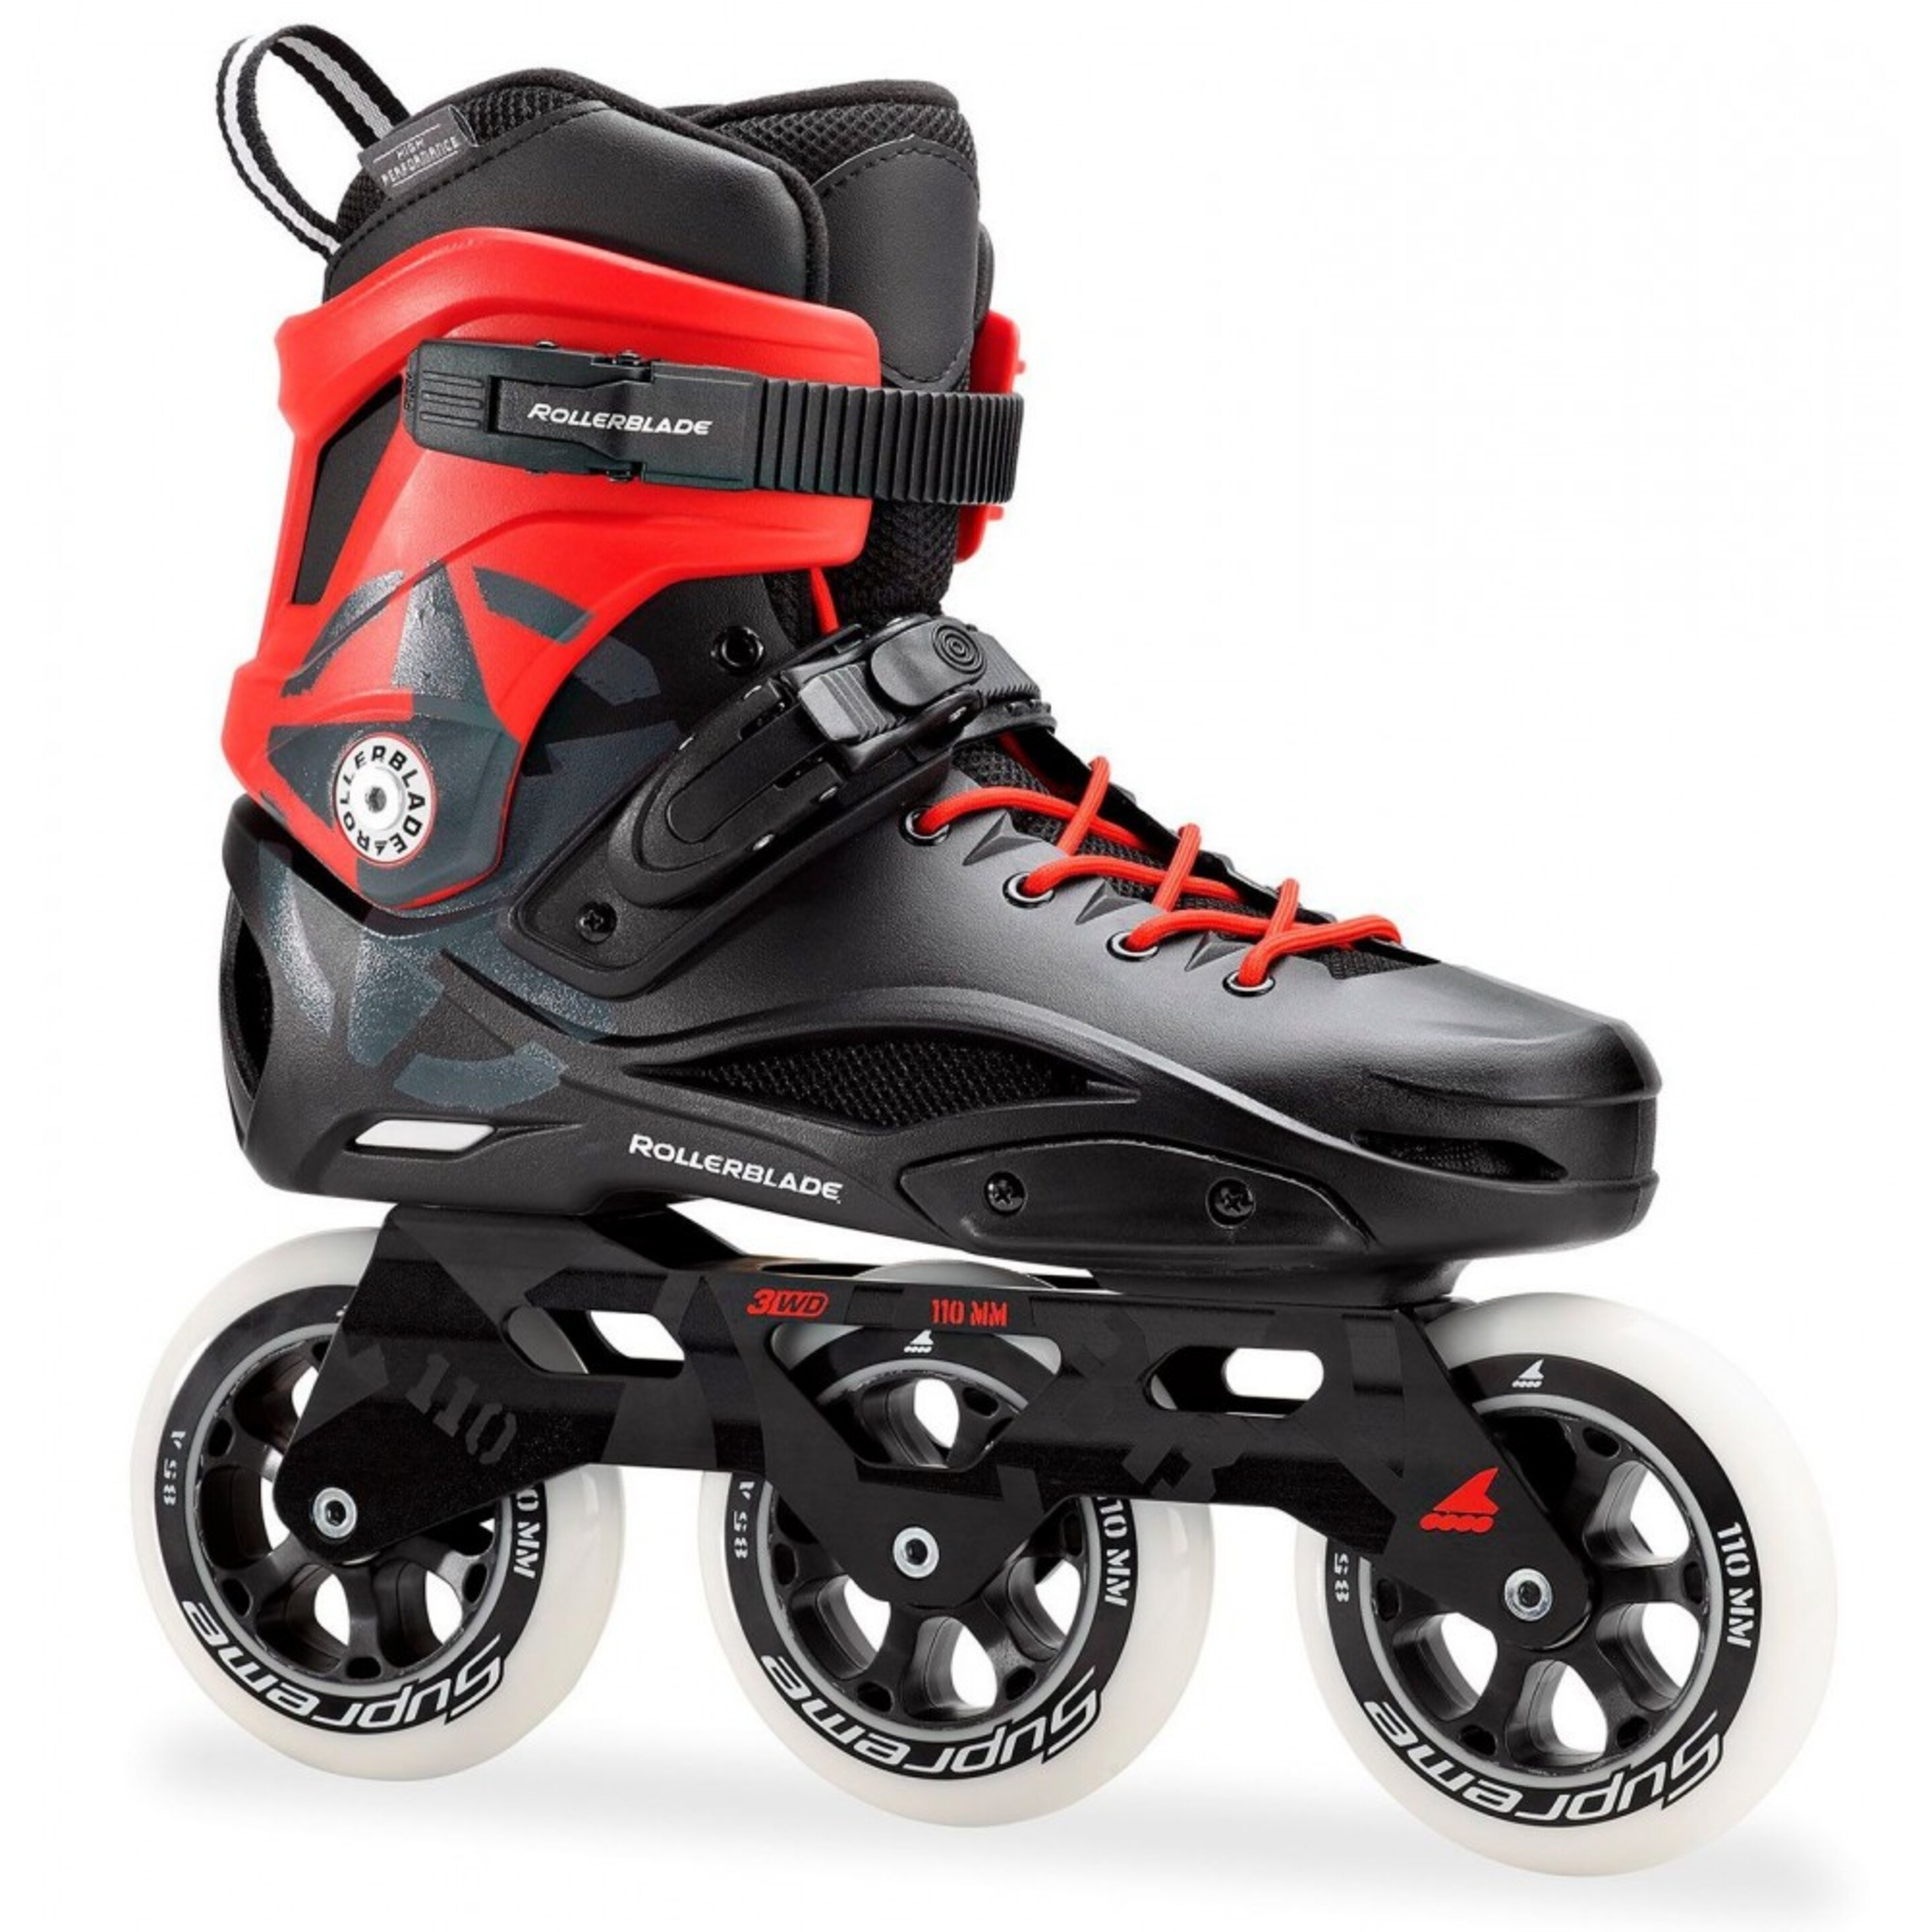 Rollerblade Rb 110 3wd